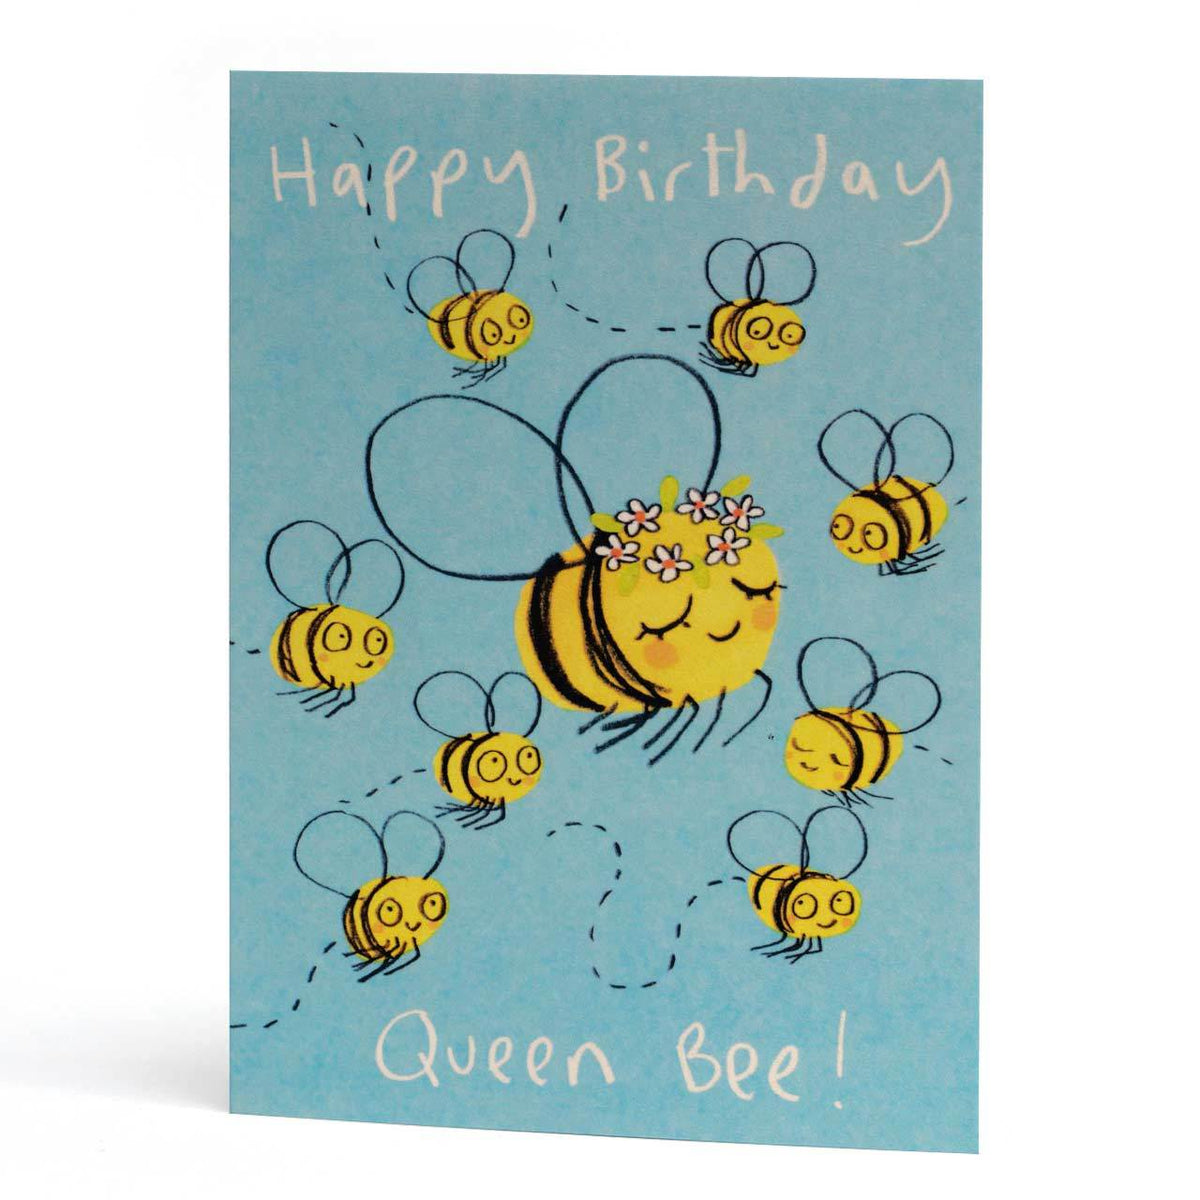 Happy Birthday Queen Bee Greeting Card | The Curious Pancake